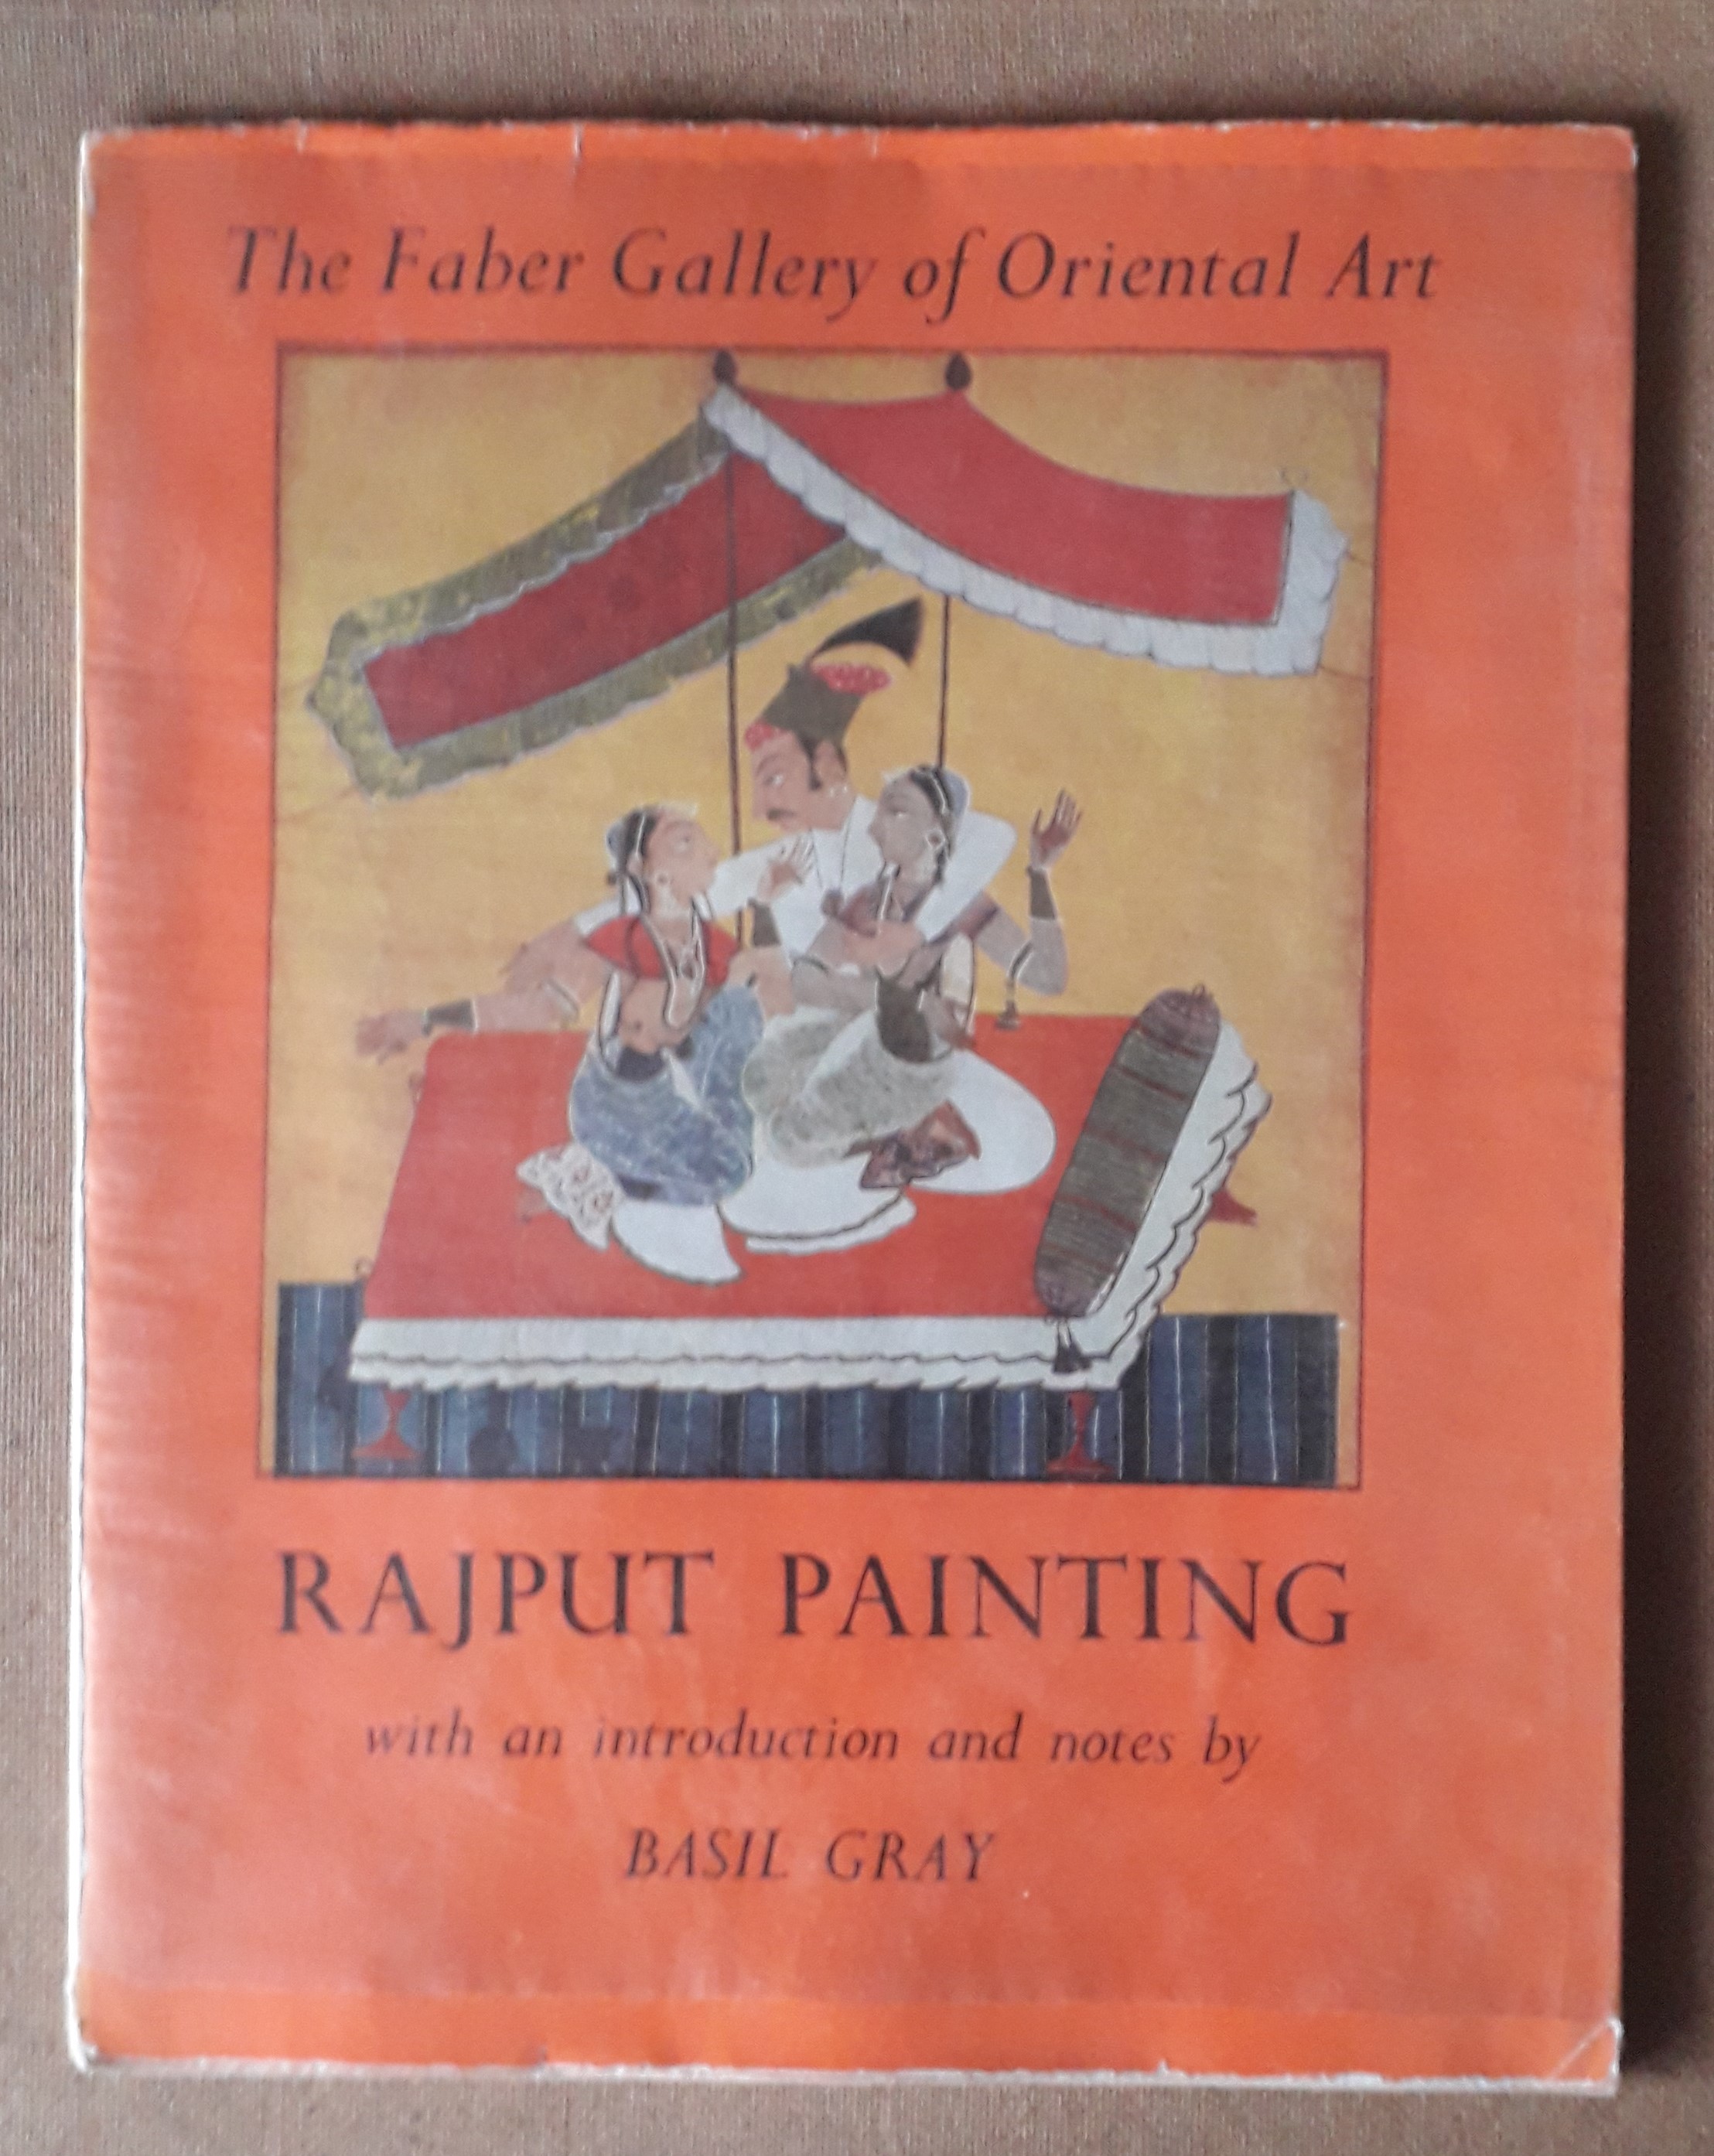 The Faber Gallery of Oriental Art Rajput Painting